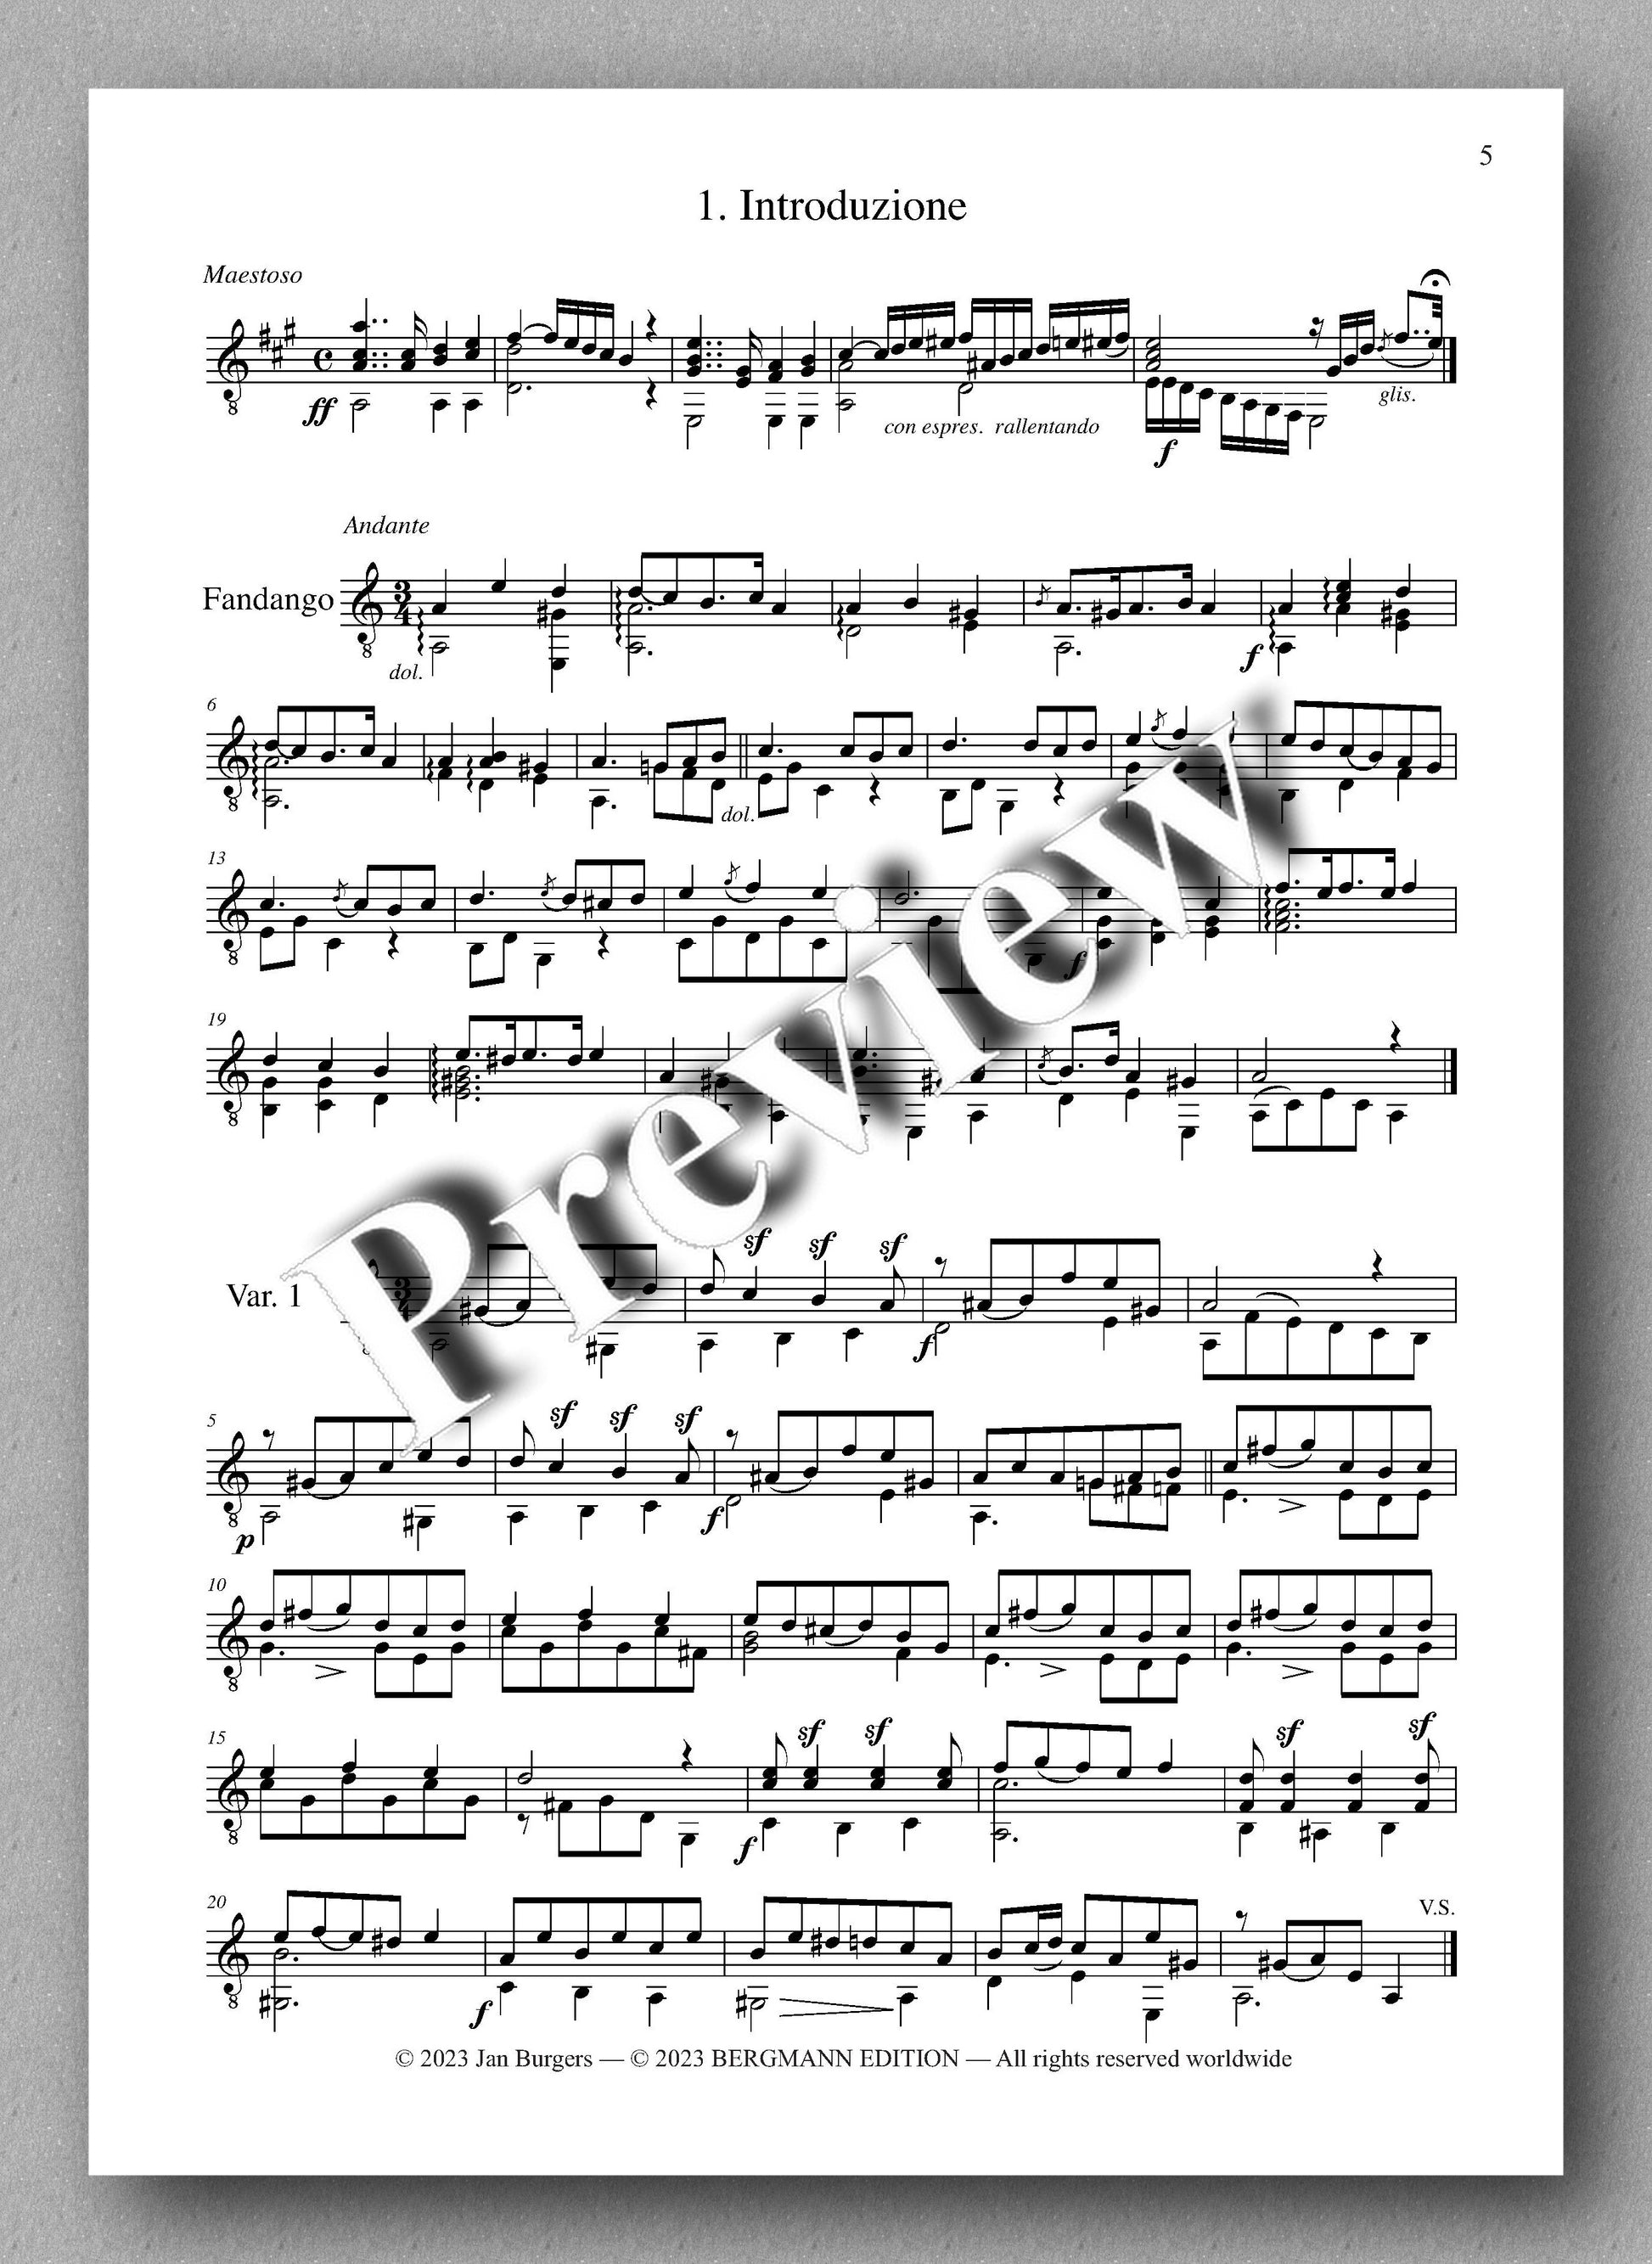 Molino, Collected Works for Guitar Solo, Vol. 42 - preview of the music score 1